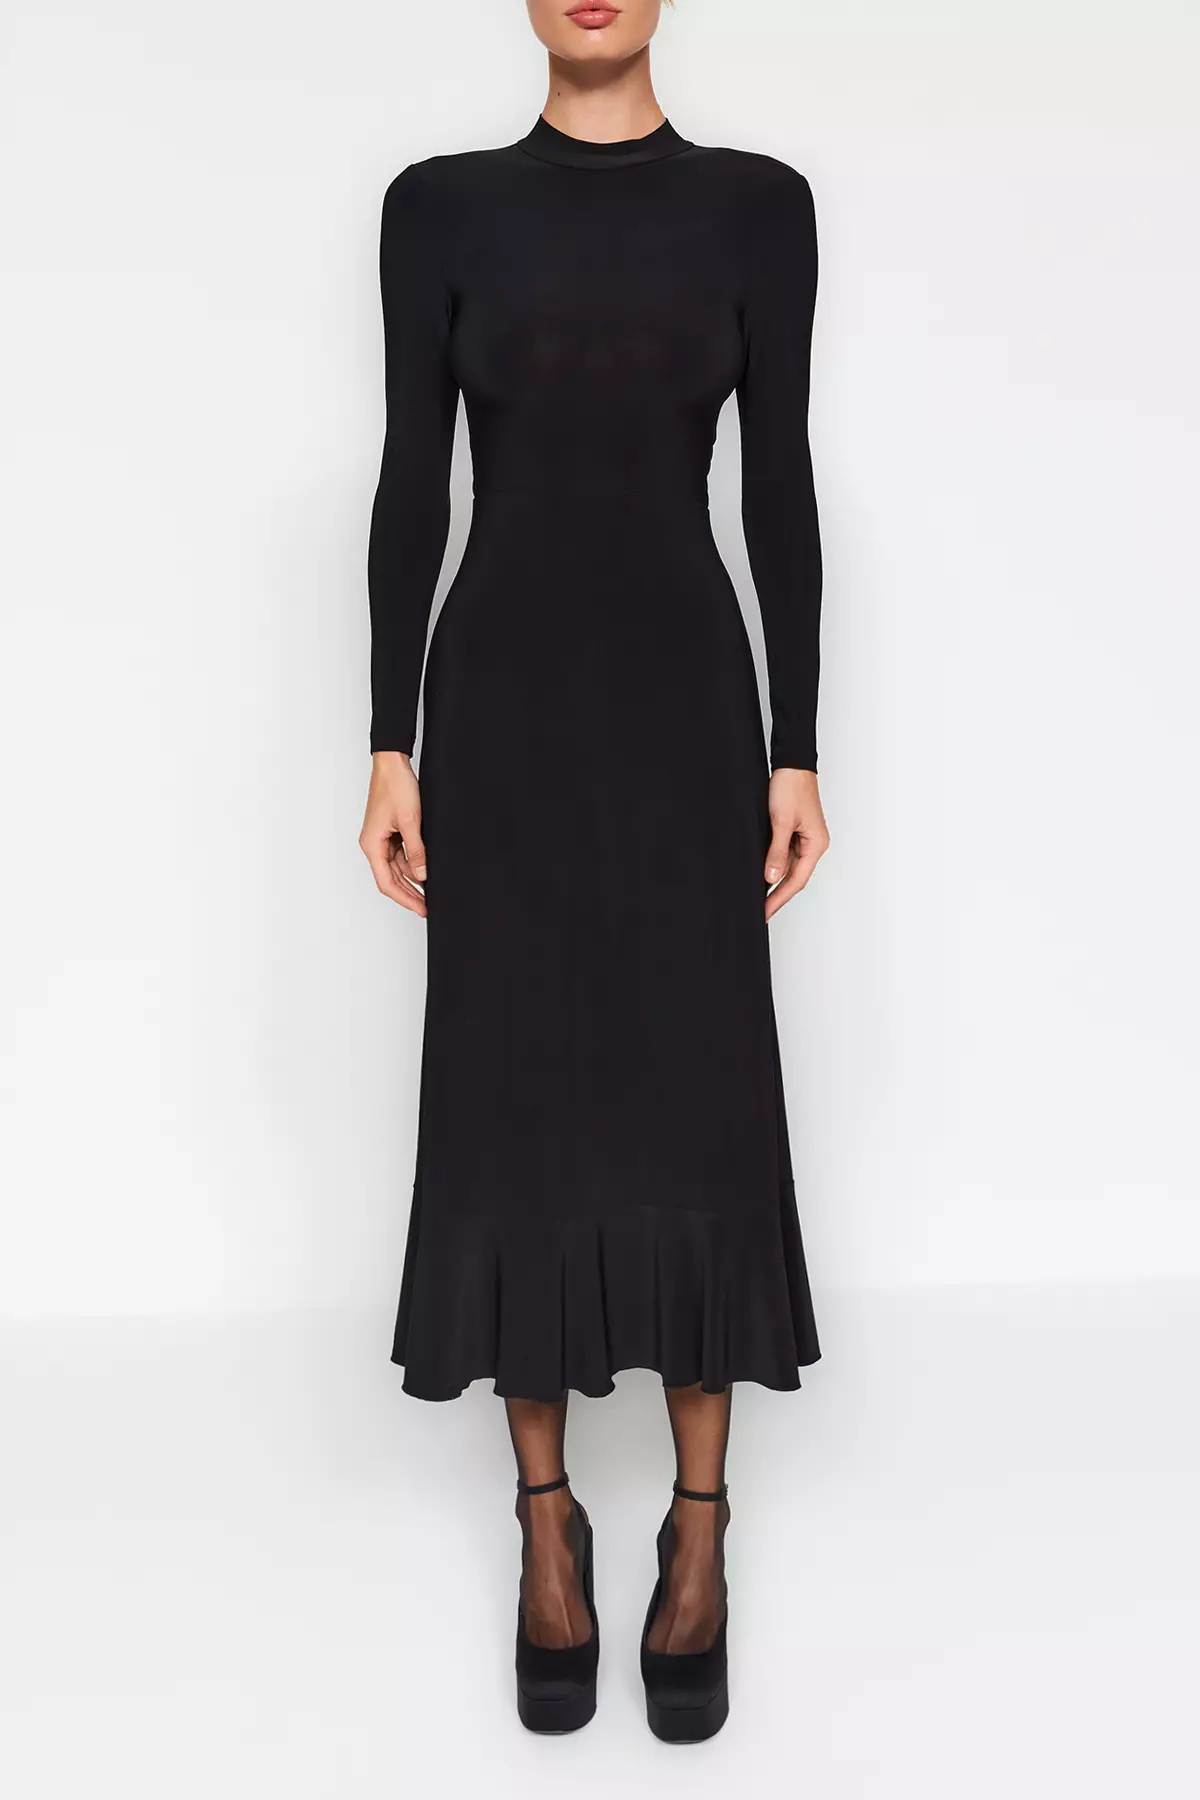 Buy Trendyol Black Maxi Oversized Knit Dress with Ruffles Pleats and ...